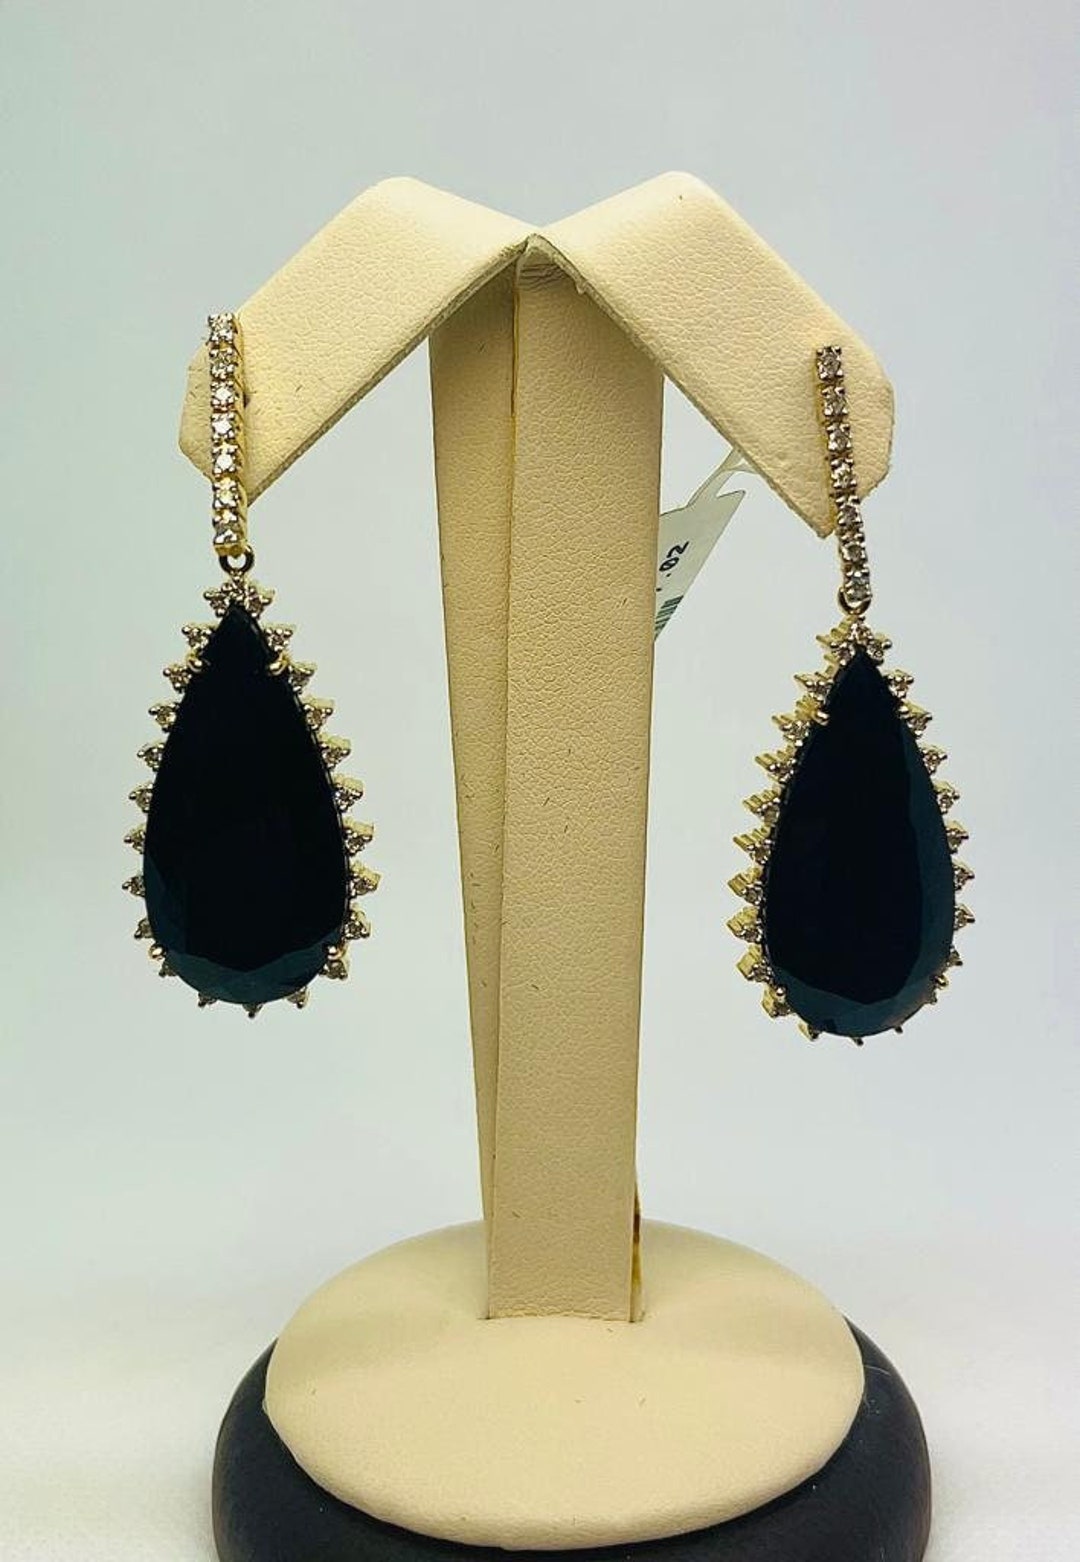 18 KT Yellow Gold Abstract Glam Diamond and Onyx Drop Earrings